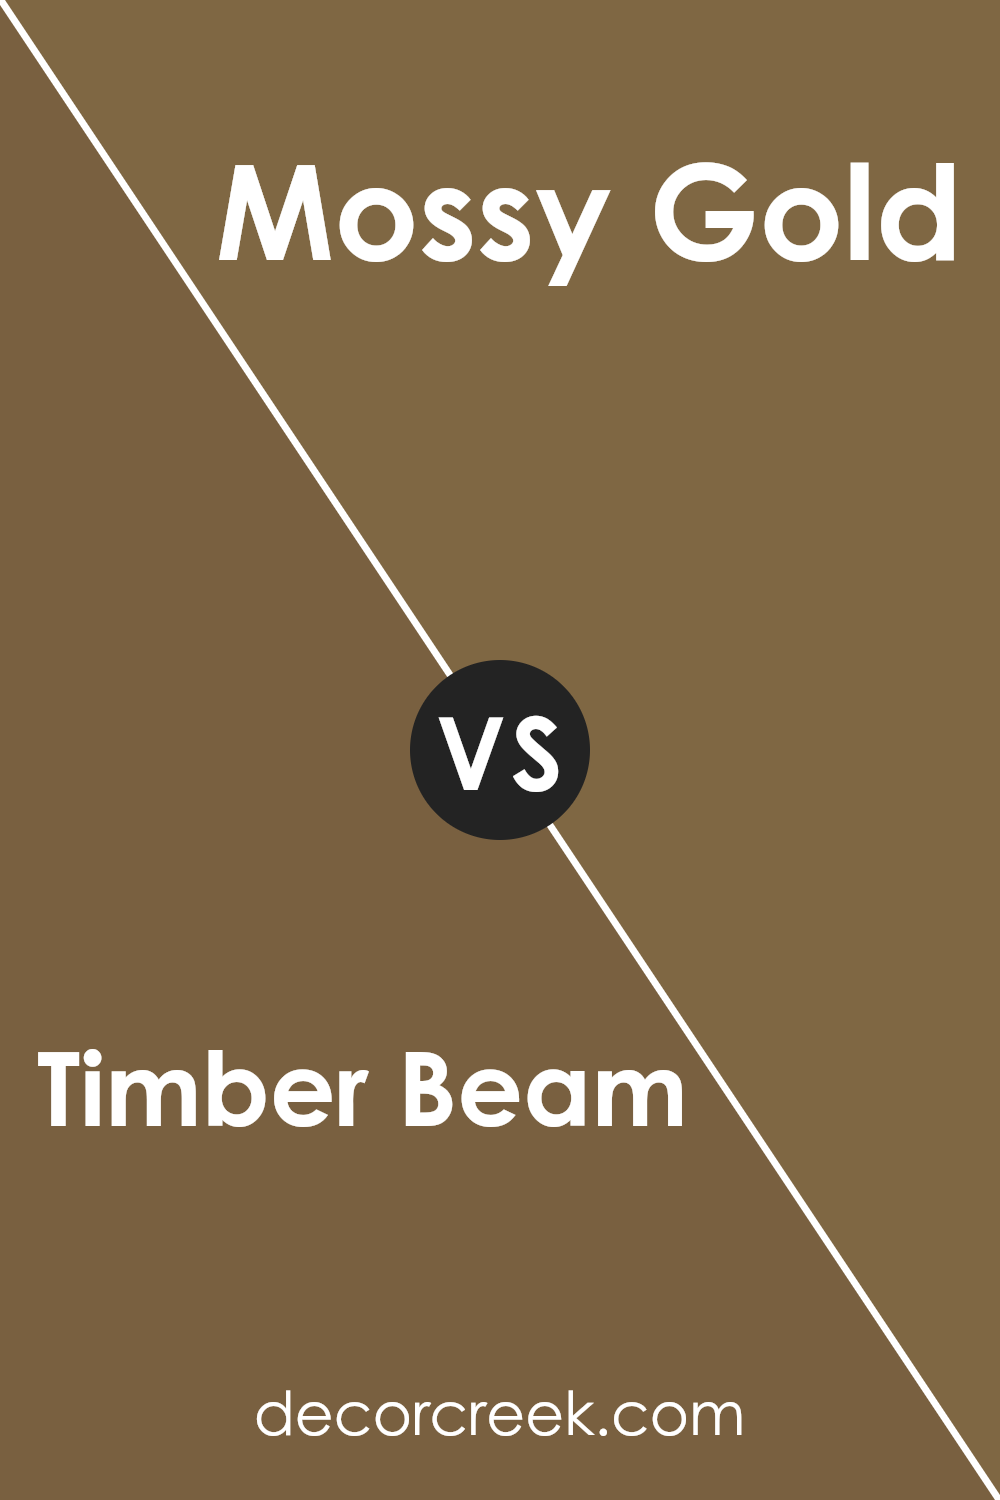 timber_beam_sw_9540_vs_mossy_gold_sw_6139